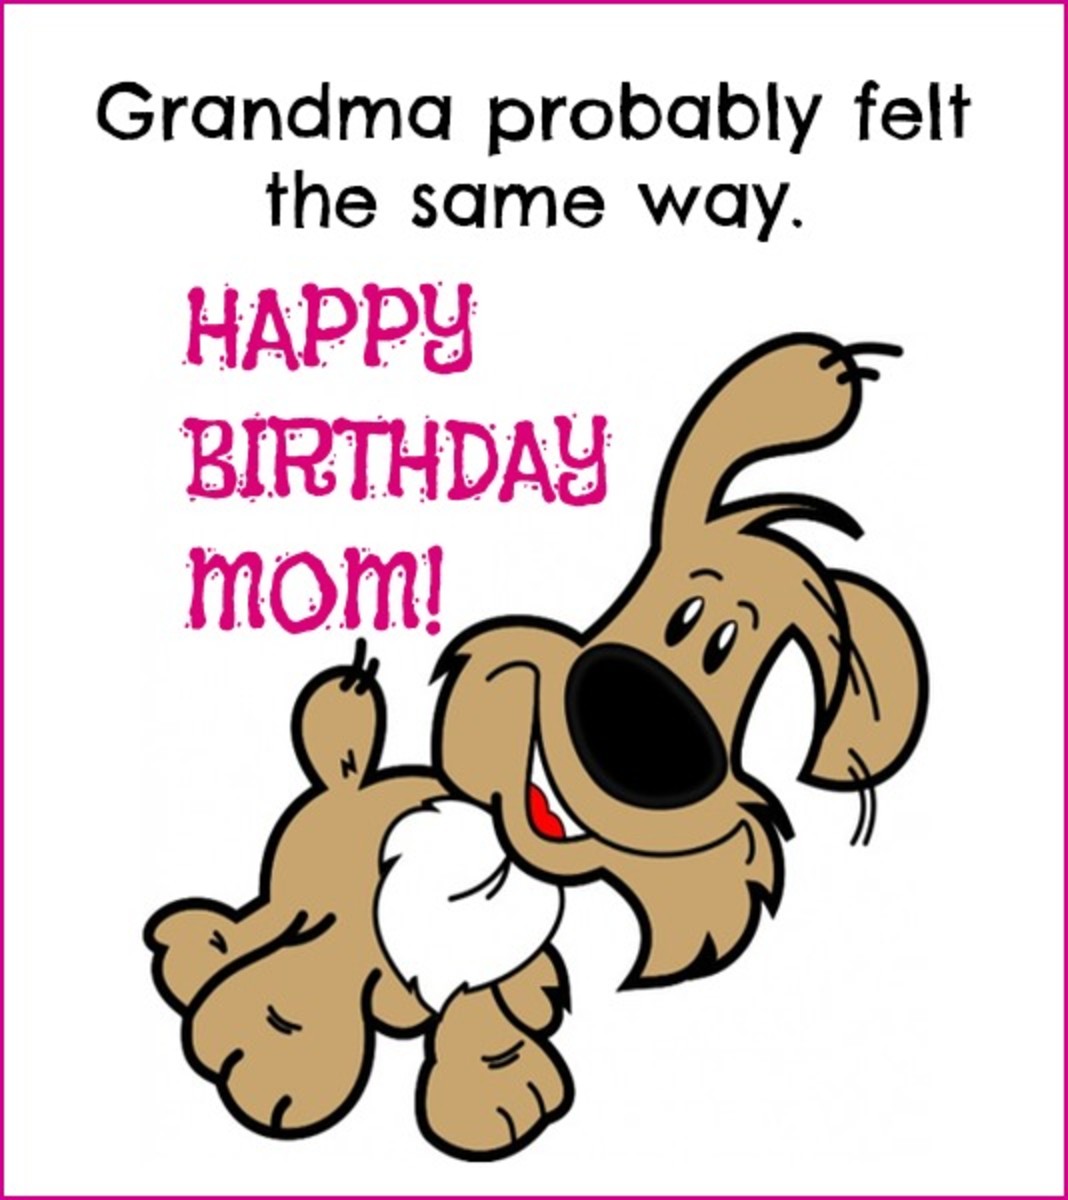 HAPPY BIRTHDAY MOM Birthday Wishes for Mom Funny Cards and Quotes